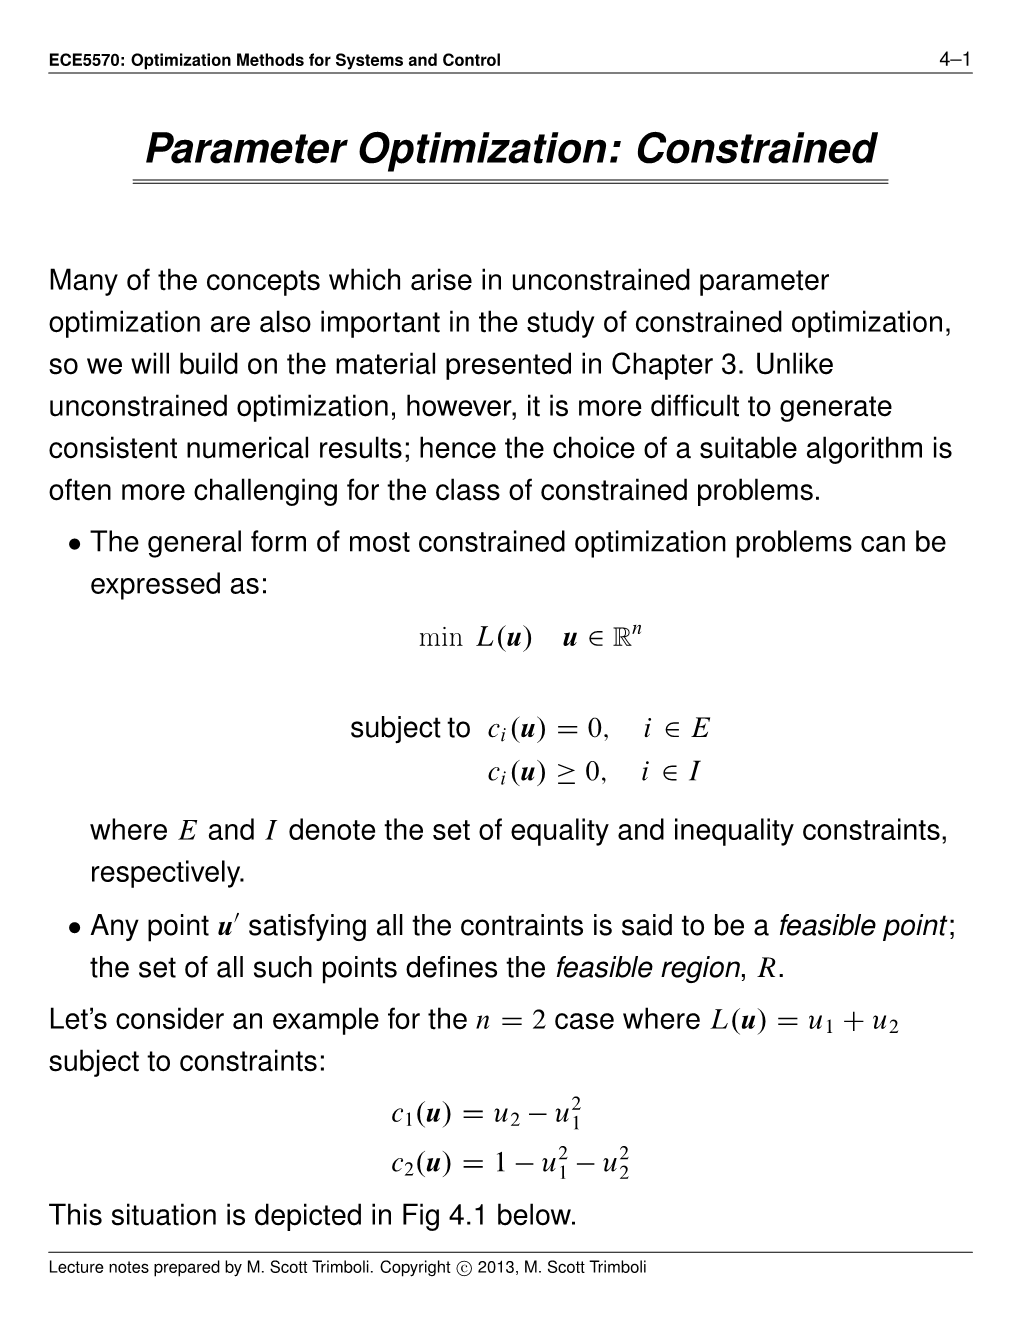 Parameter Optimization: Constrained